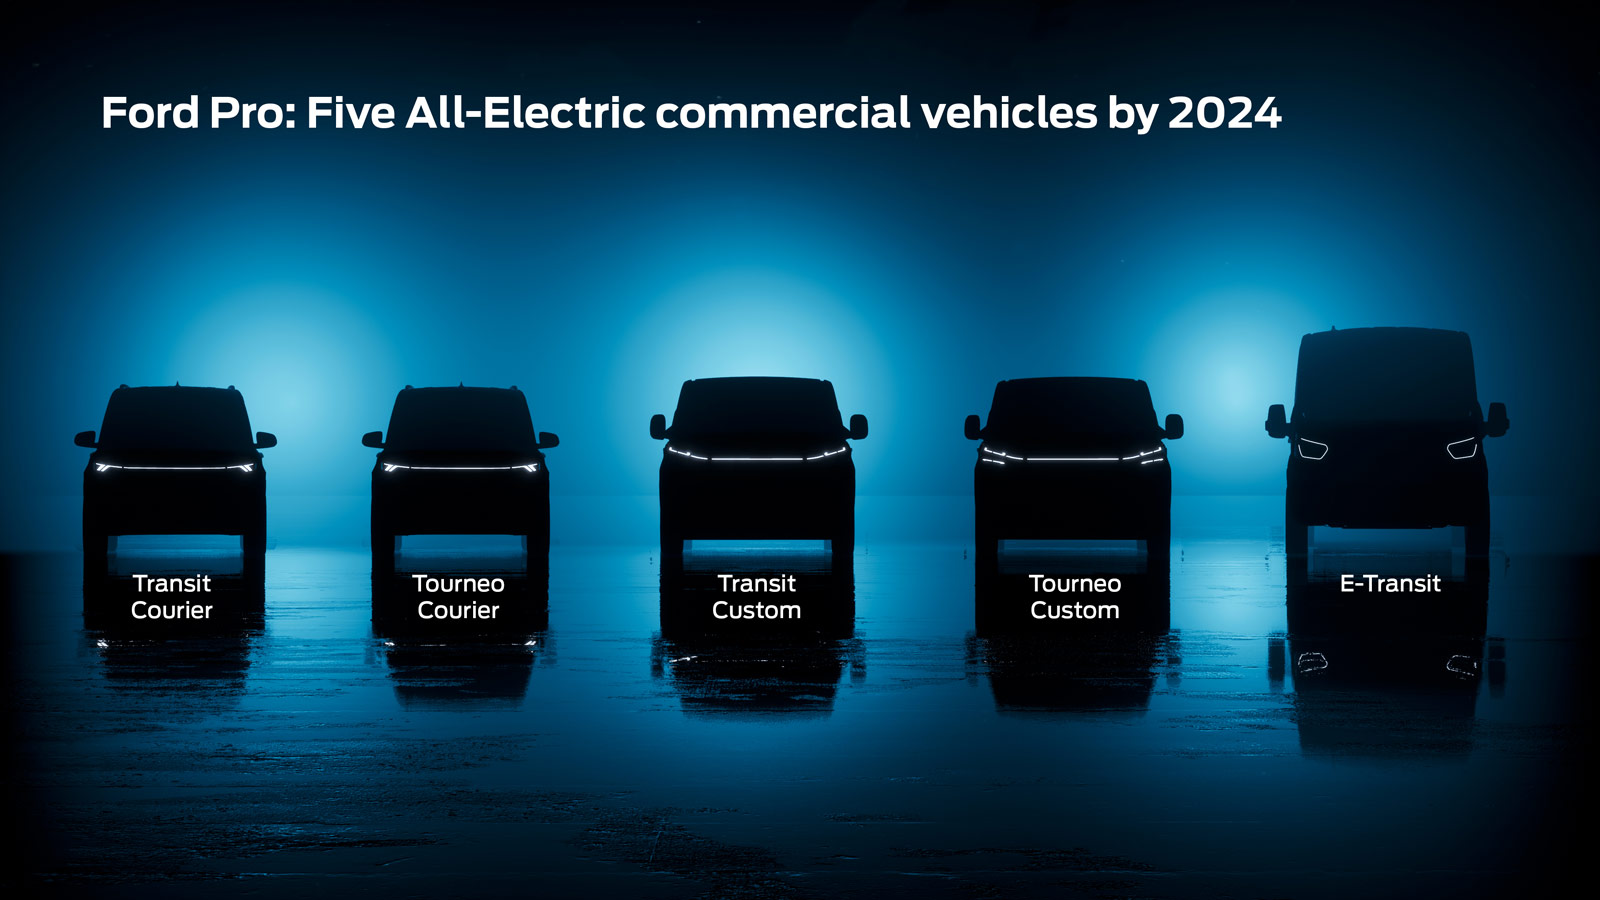 All-electric-commercial-vehicles